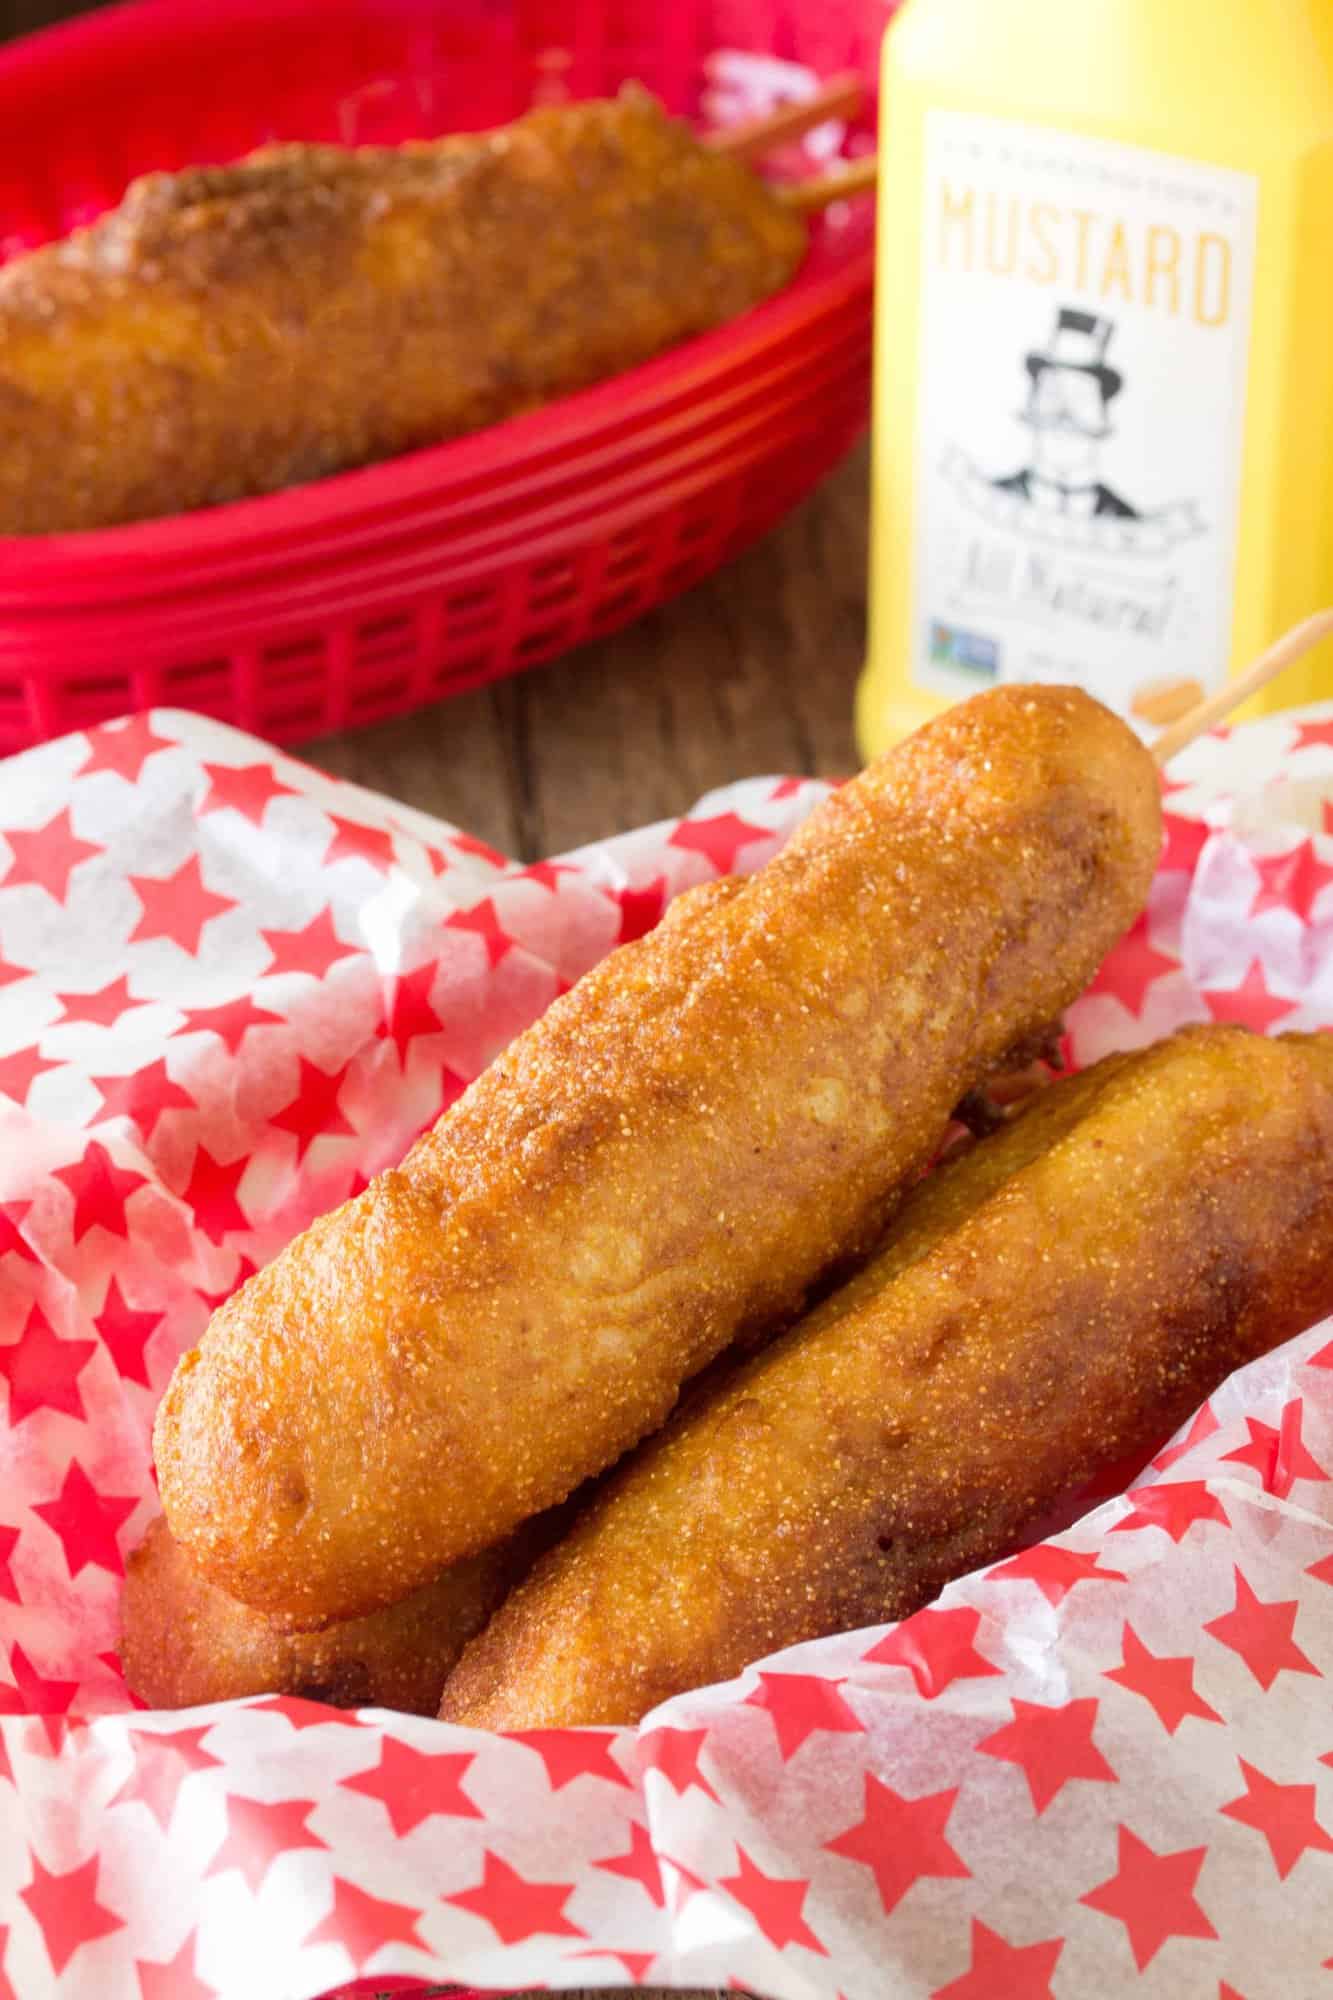 These Disneyland-Style Hand Dipped Corn Dogs are covered with a thick cornbread coating and fried to golden brown perfection. It’s just like they make them on Main Street at Disneyland’s Little Red Wagon.